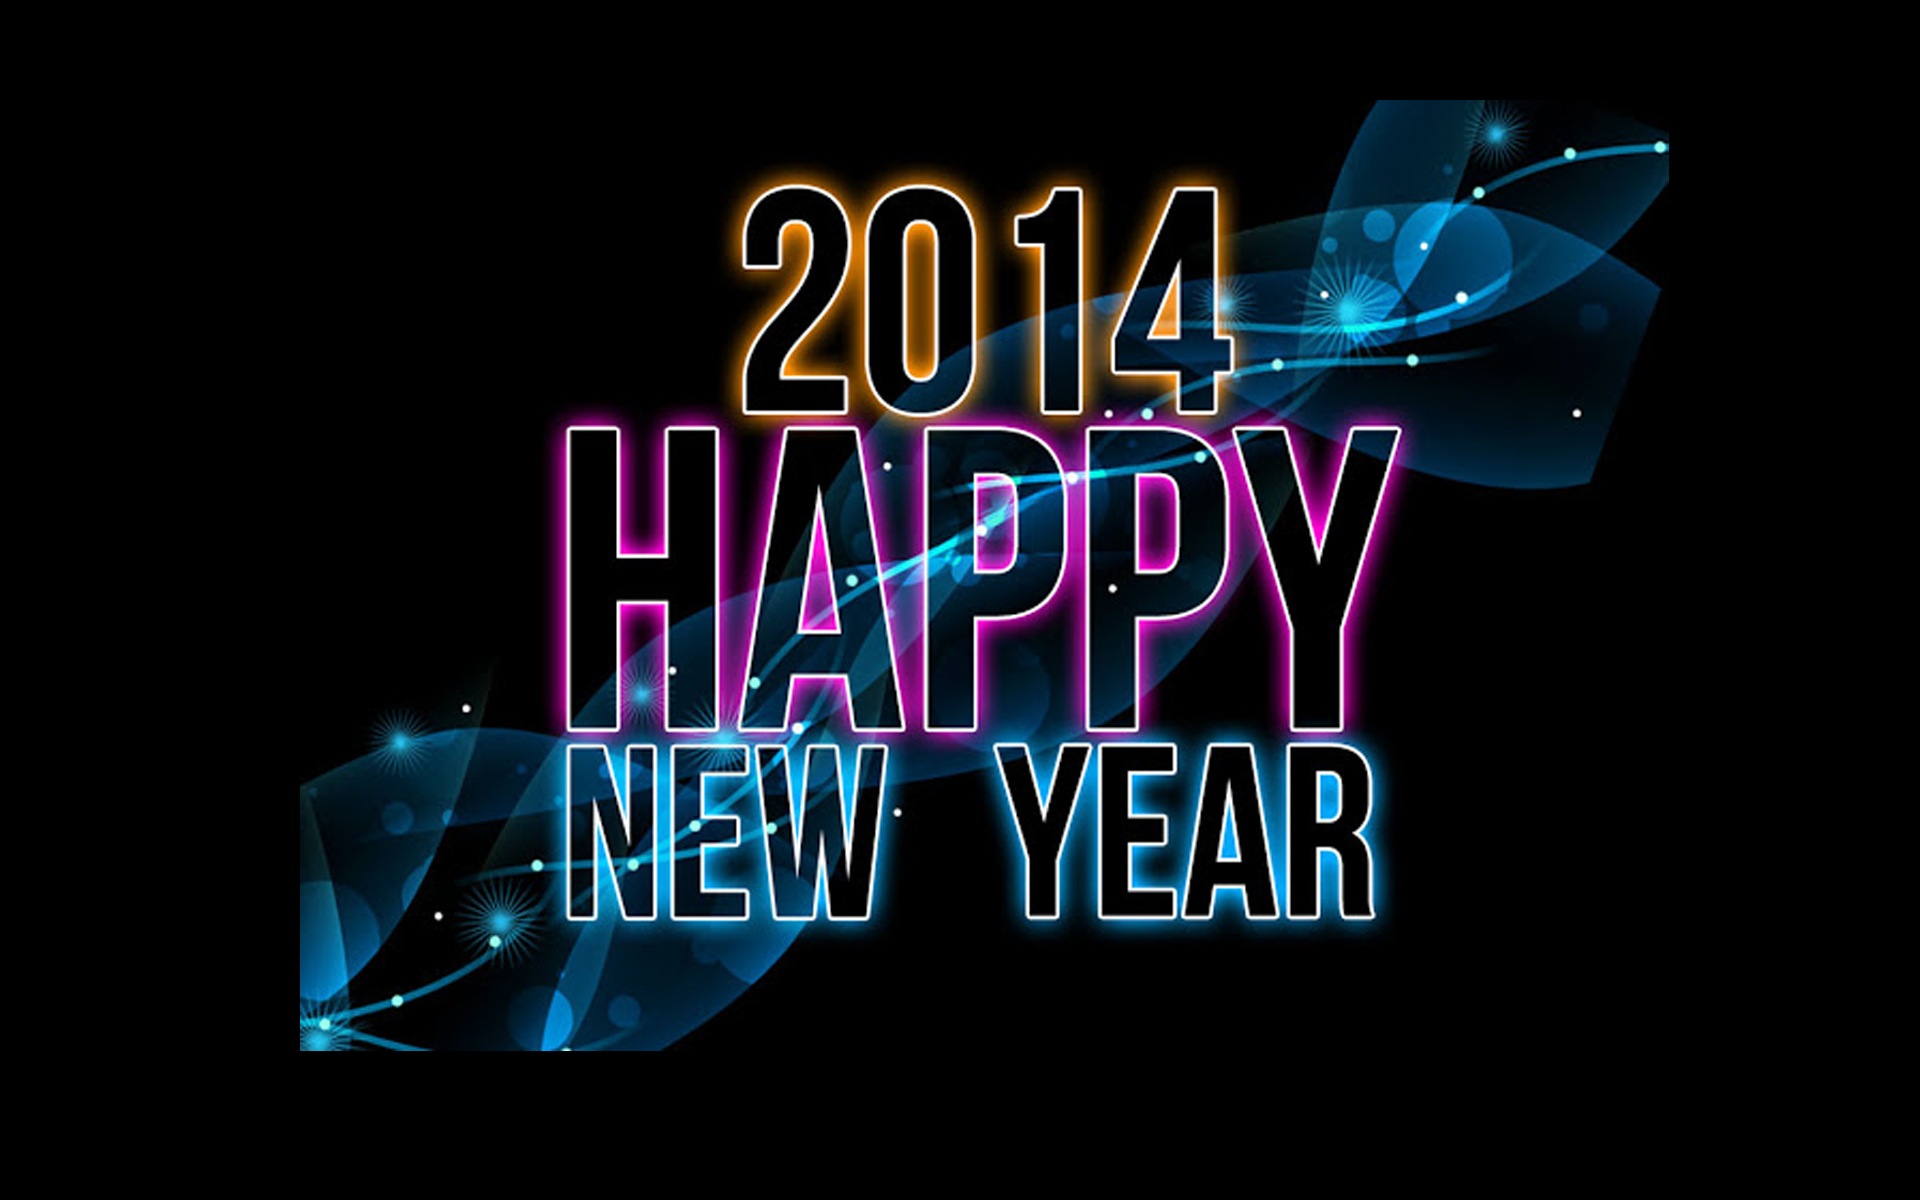 2014 New Year Theme HD Wallpapers (1) #11 - 1920x1200